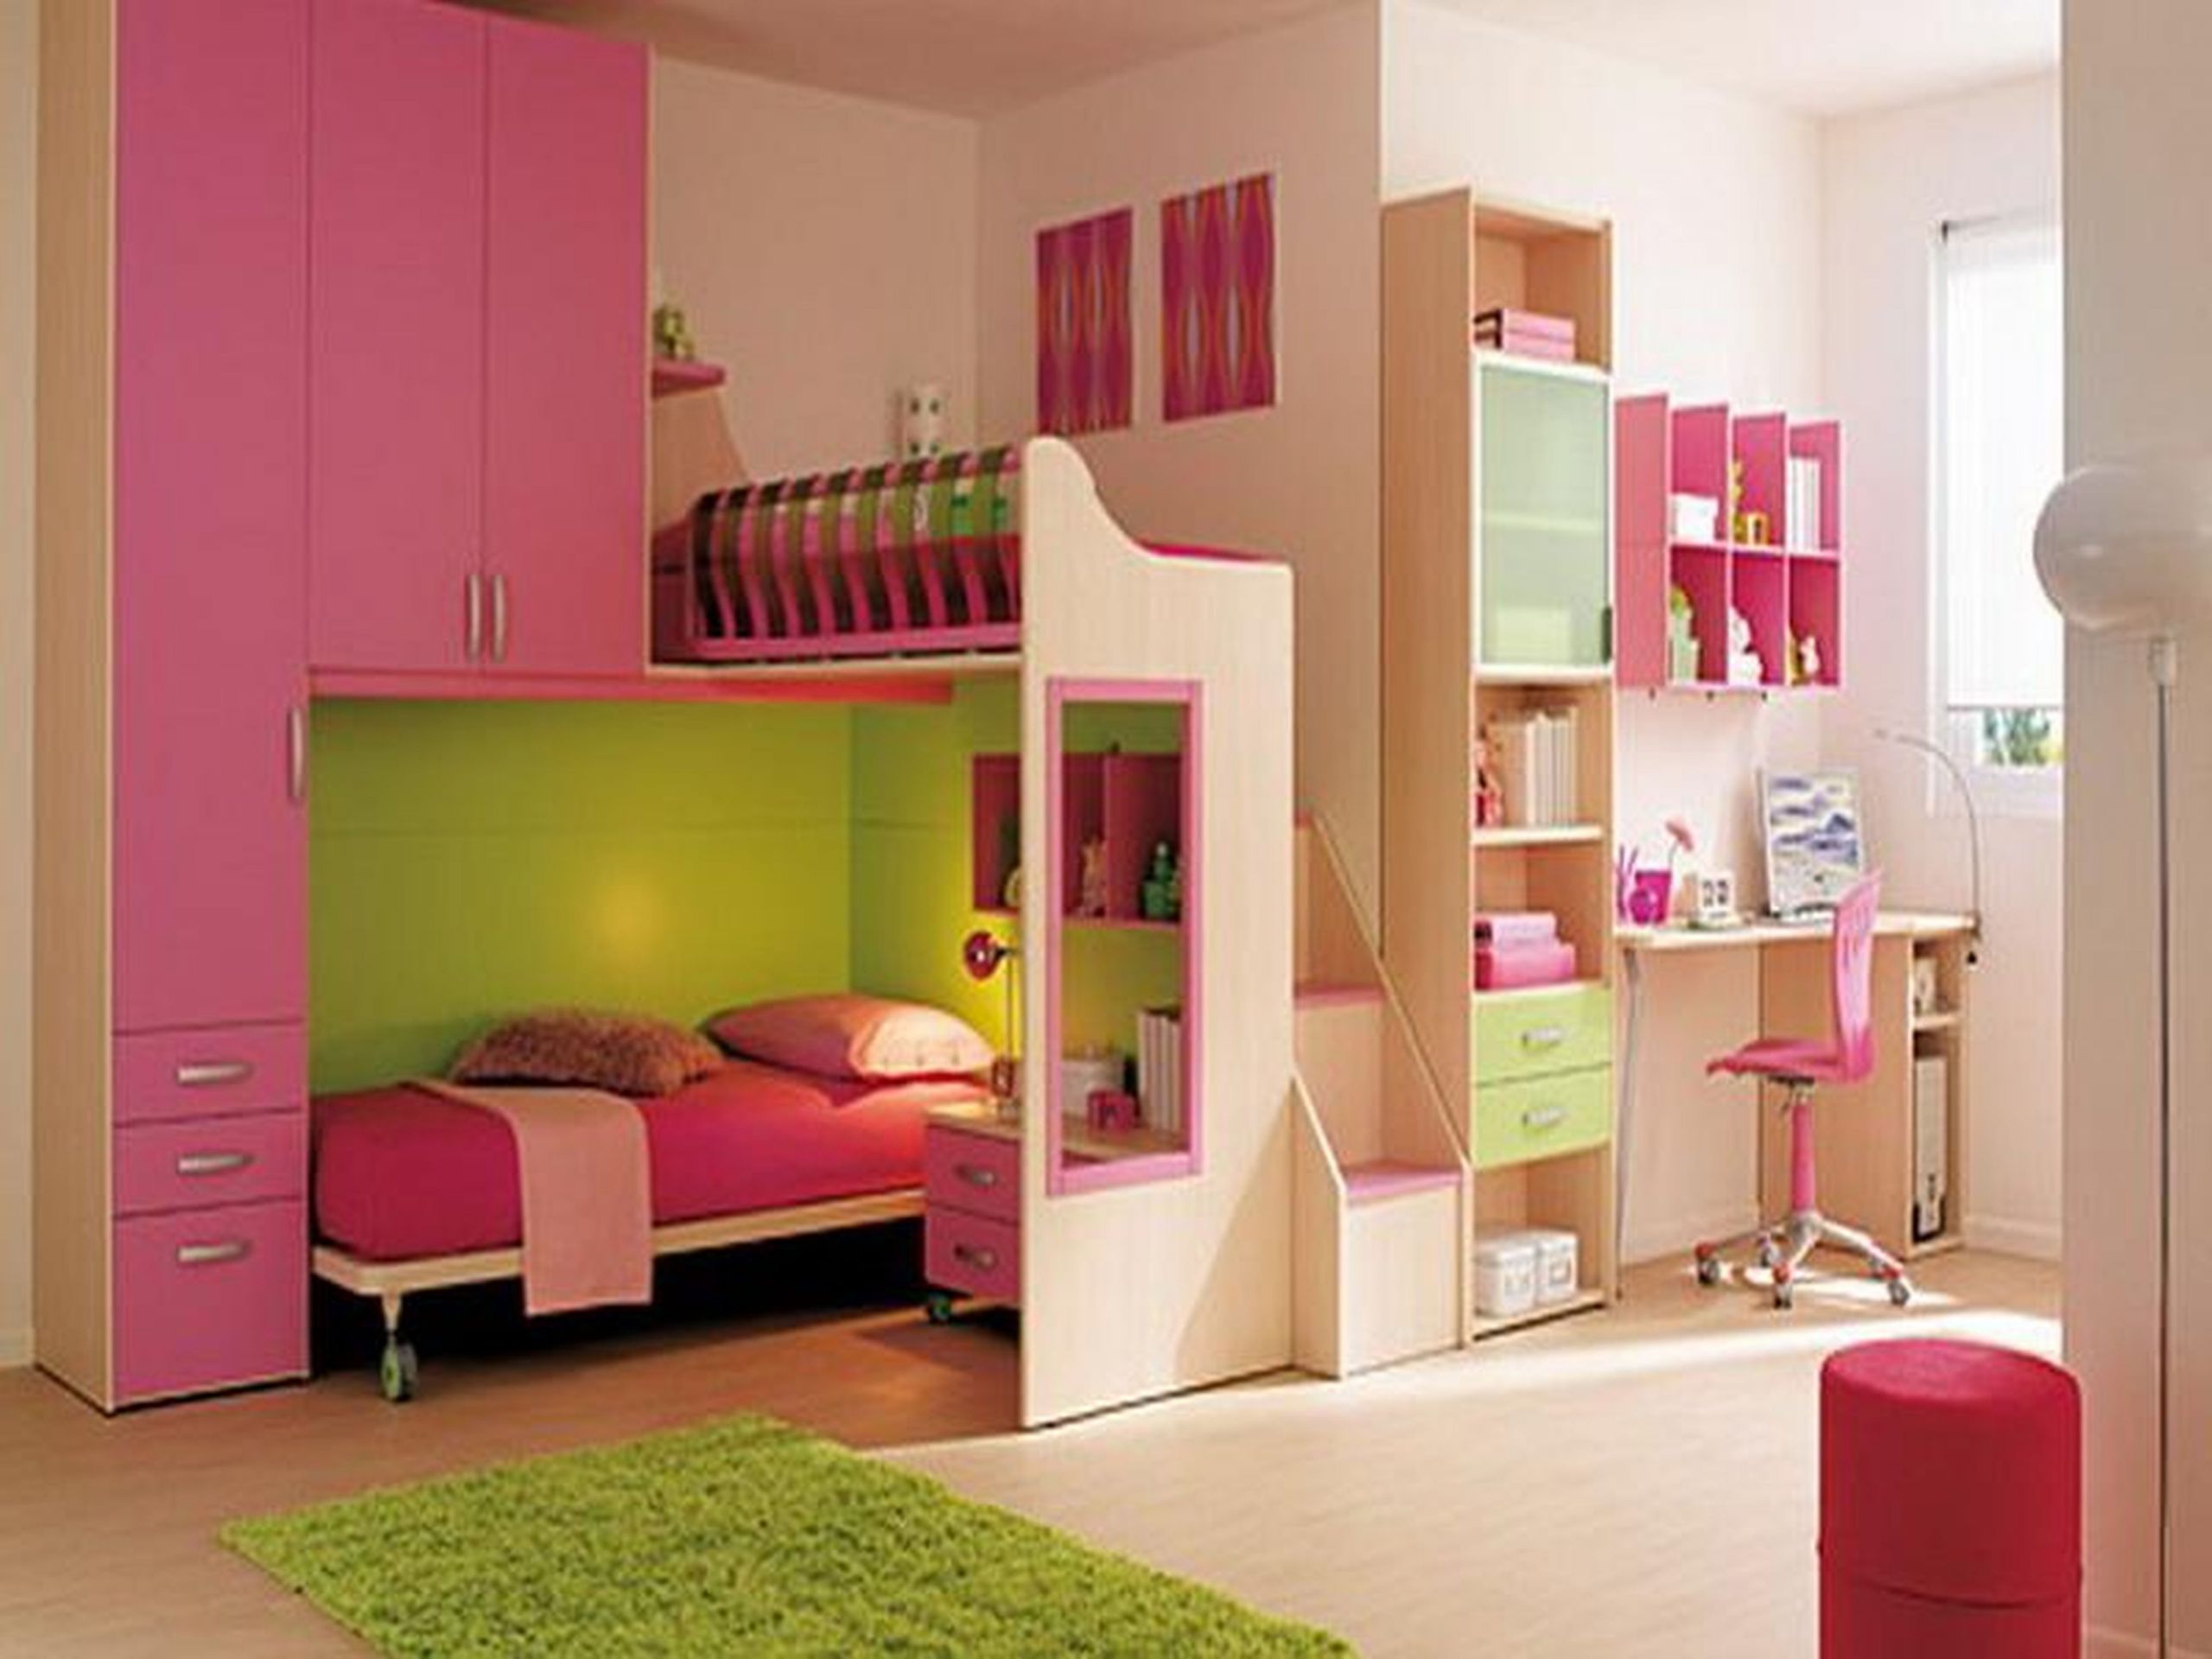 Diy For Kids Room
 DIY Storage Ideas For Kids Room Crafts To Do With Kids